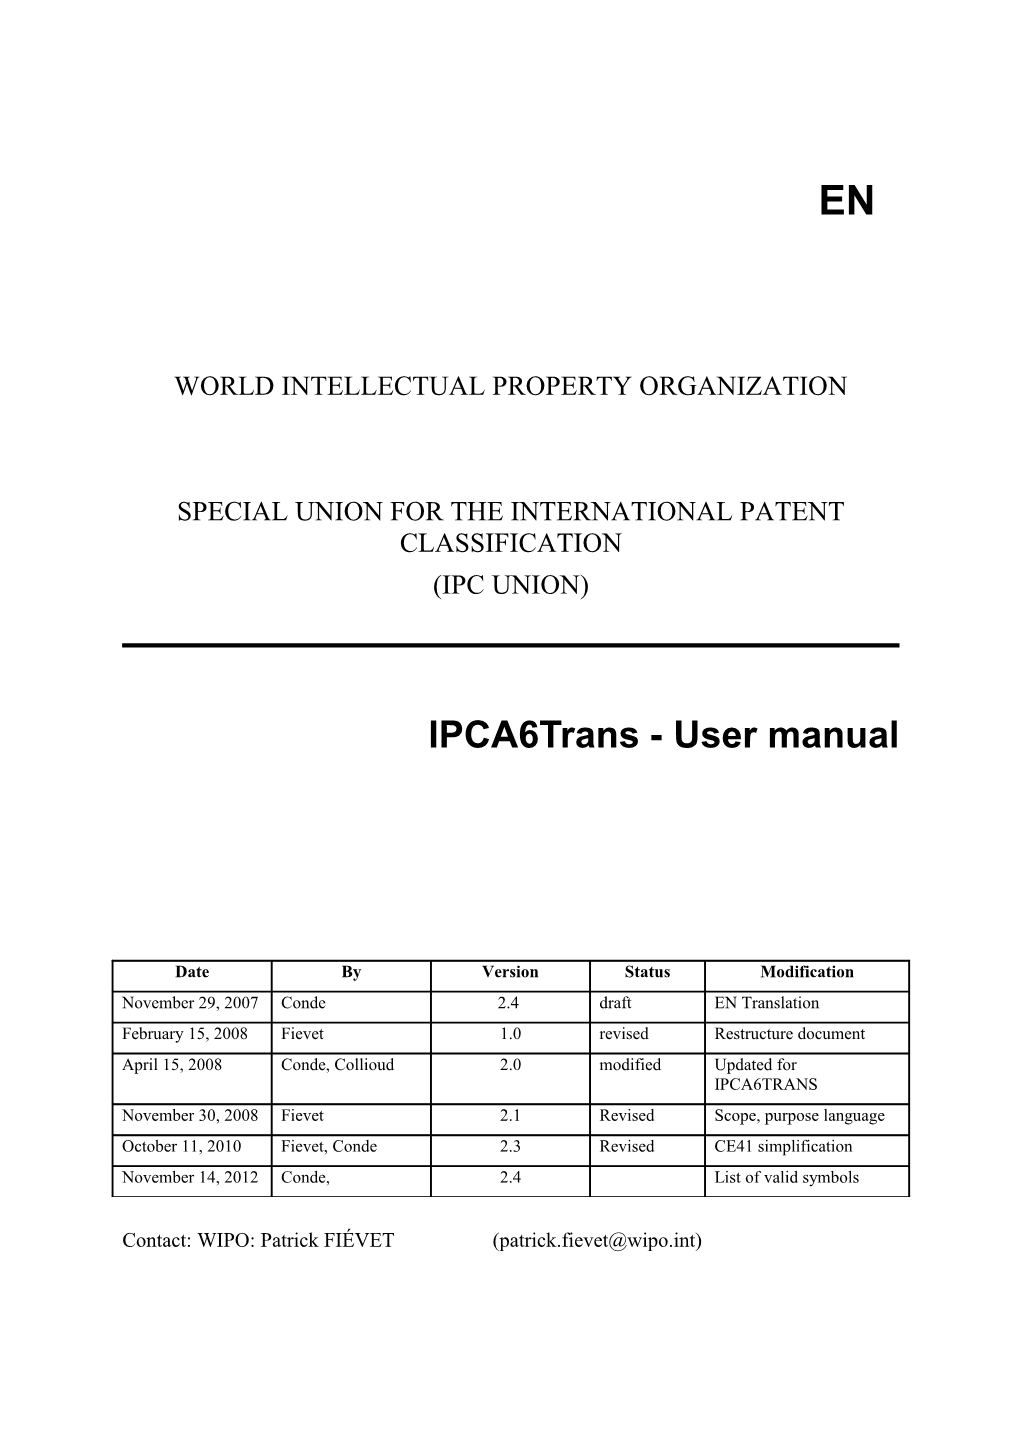 Special Union for the International Patent Classification